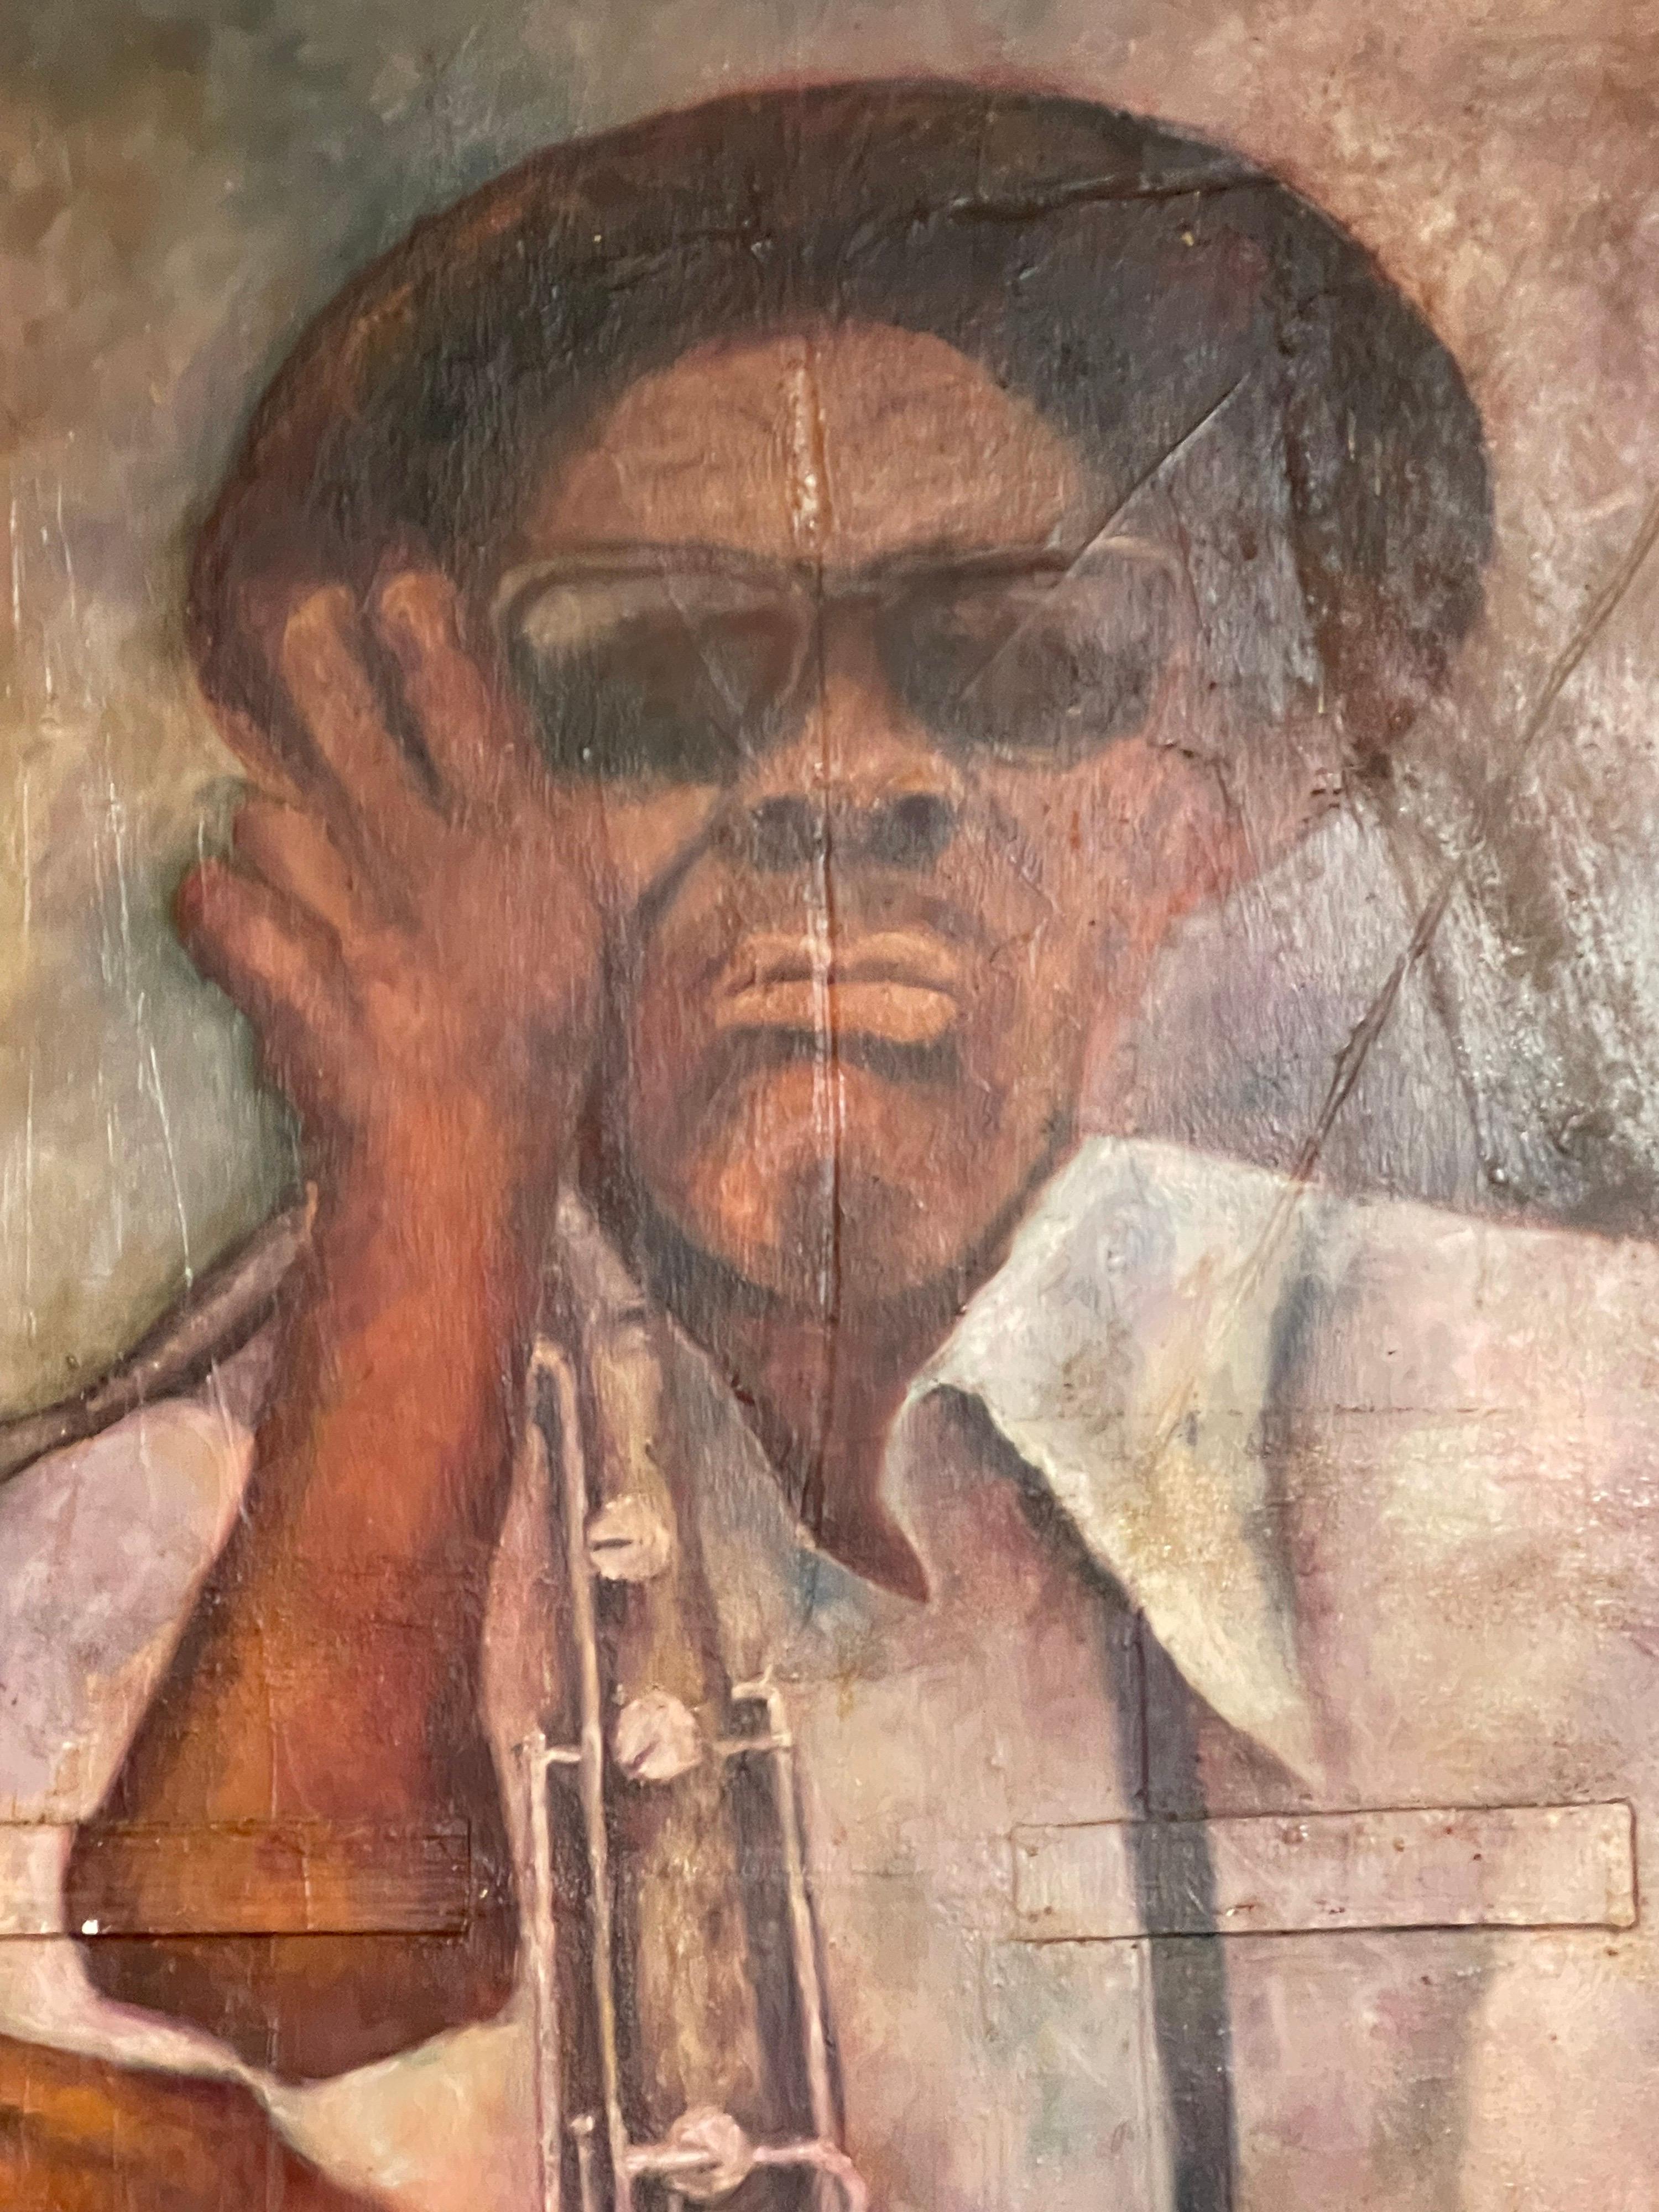 Original oil painting on board an old jazz musician. No signatures but original and well done. From Sag Harbor estate. Now more than ever, home is where the heart is.